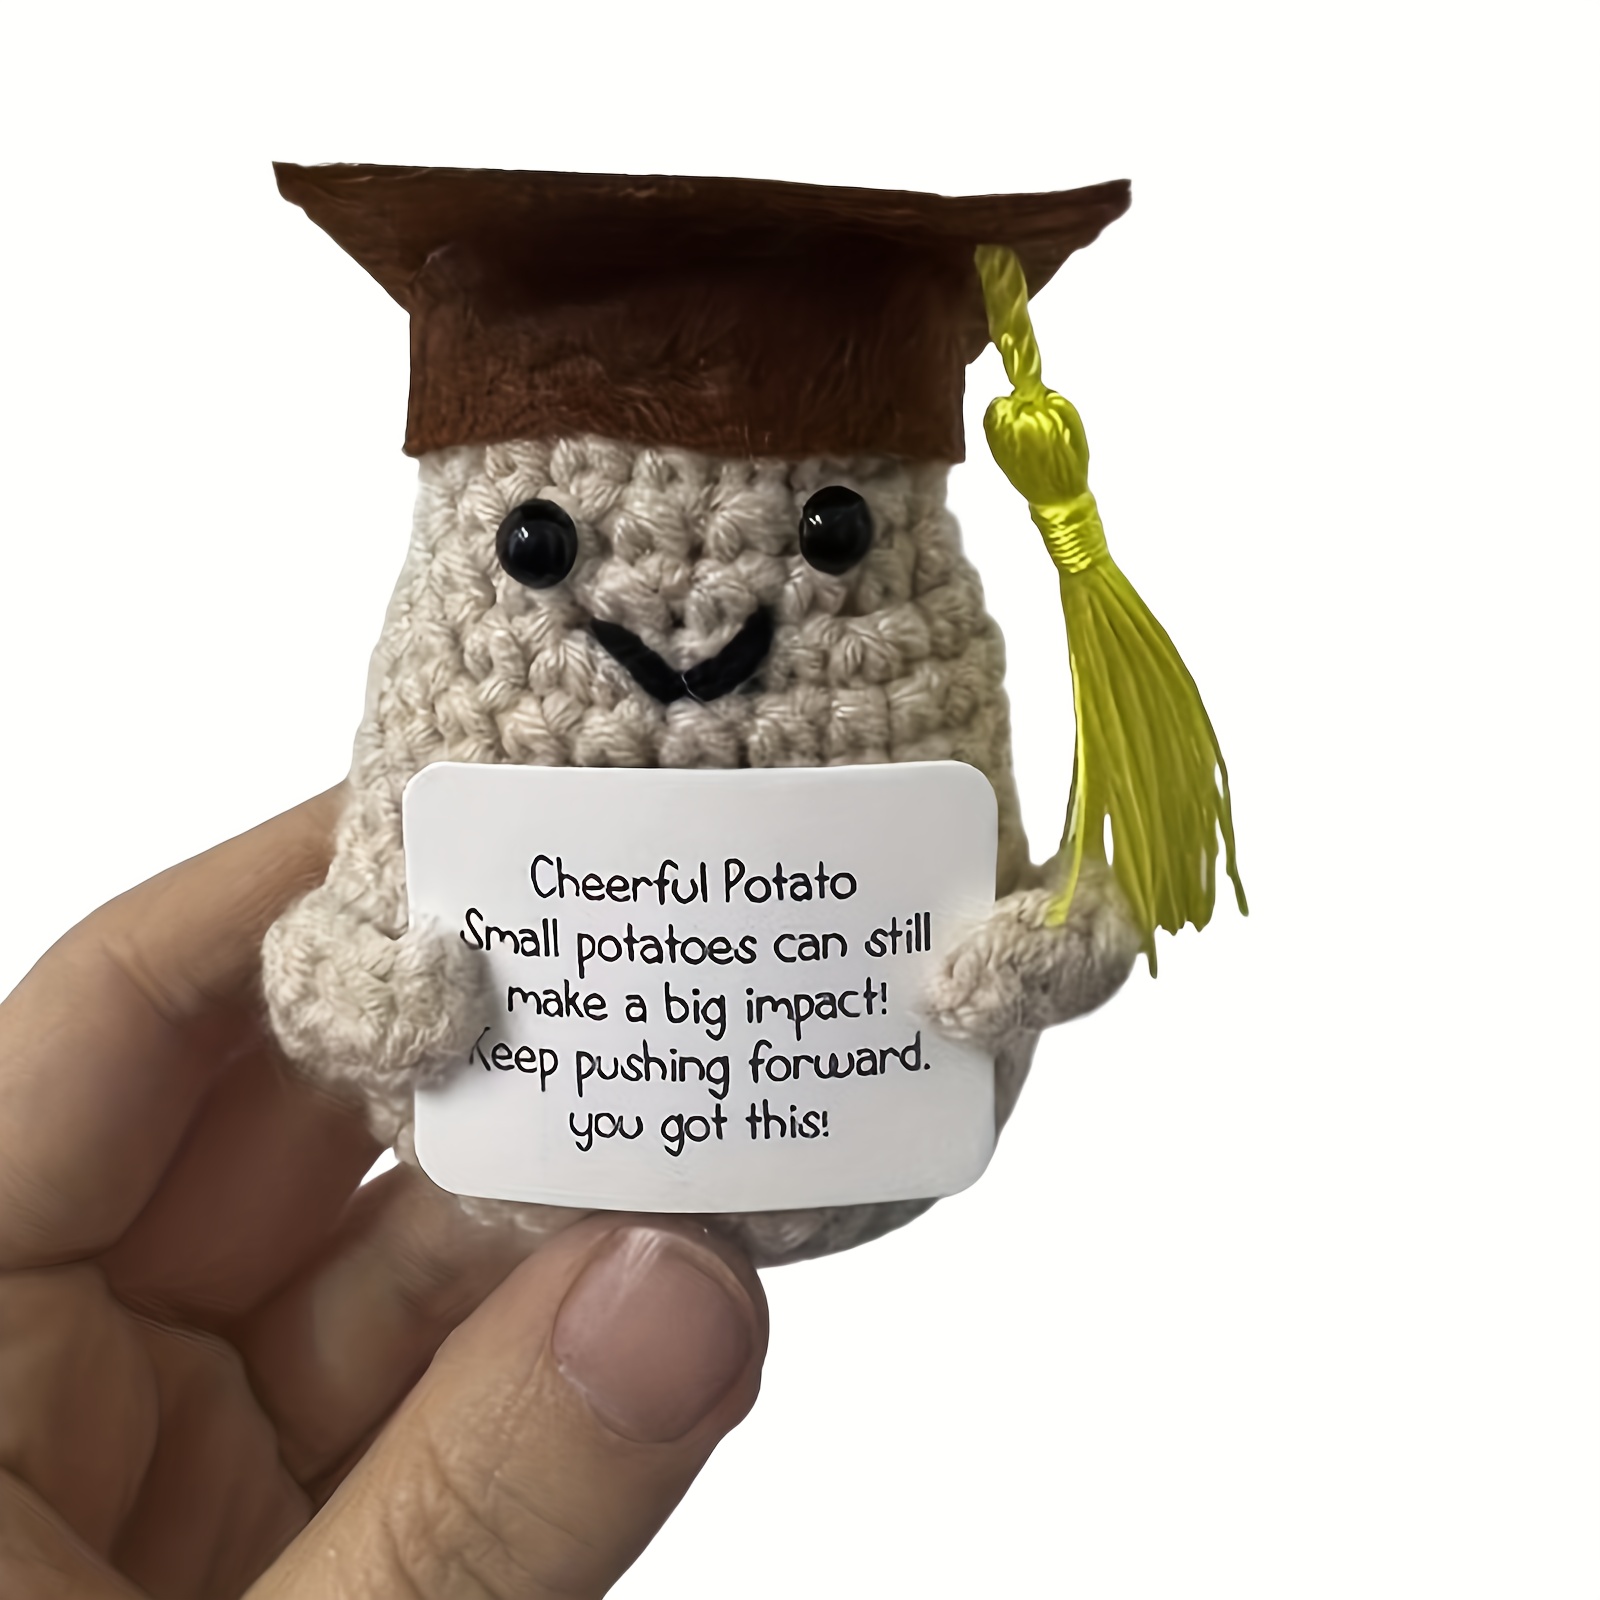 

Handmade Crochet Inspirational Potato With Positive Card, Cute Emotional Support Pickle Positive Dolls Wool Handwoven Ornaments Crochet Gifts For Woman Coworkers Friend Family Car Home Office